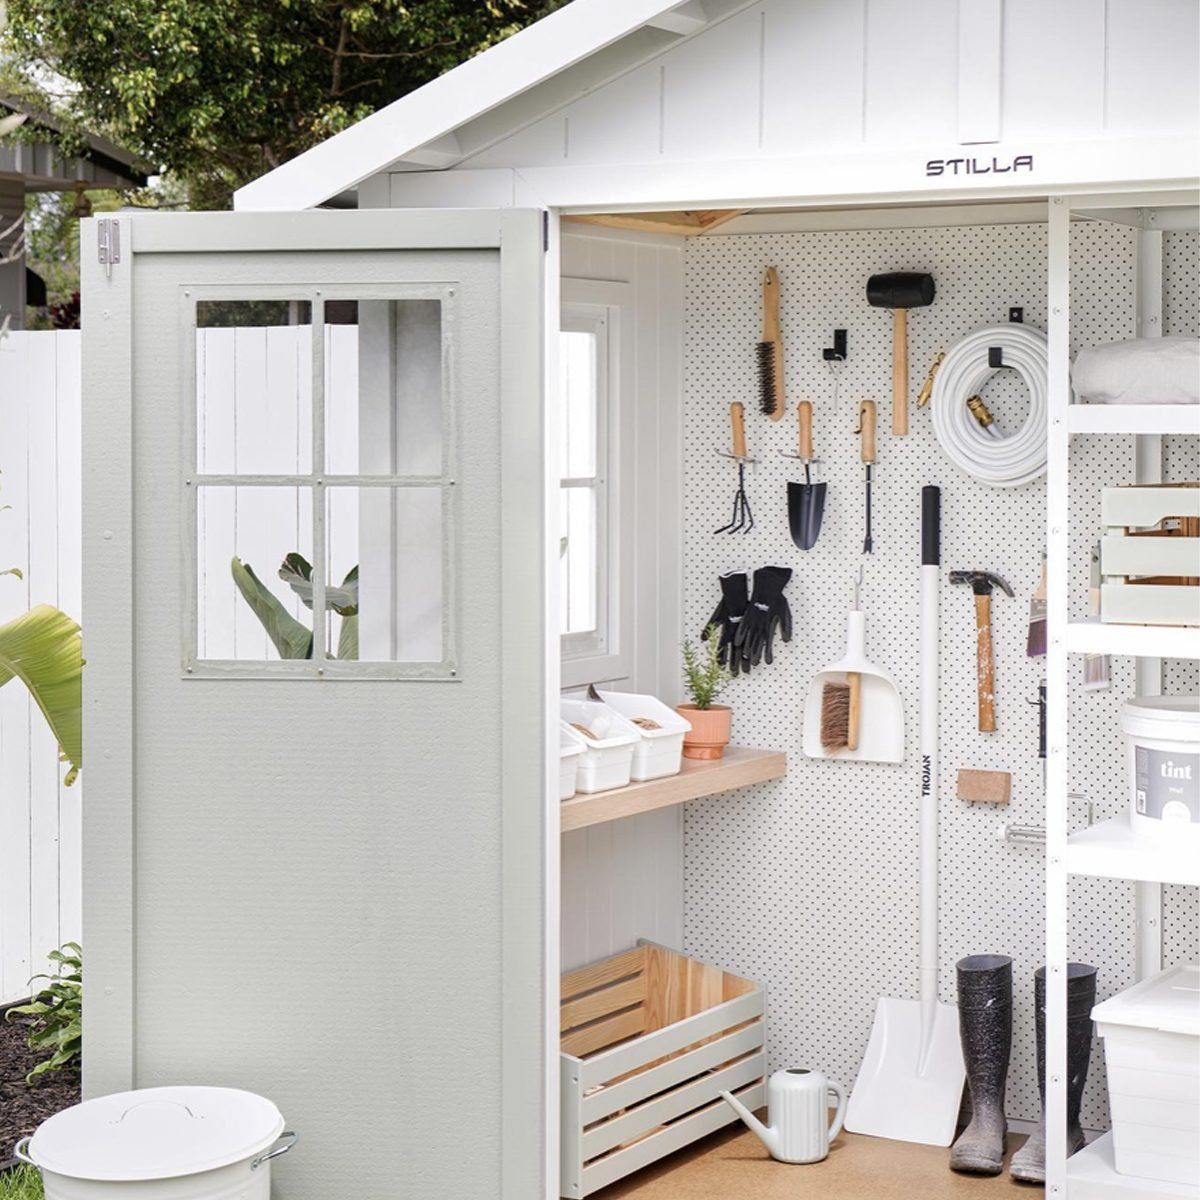 White And Bright Courtesy @coastpark.creative And Featured And Styled By @adoremagazine, Shed By @stillagroup